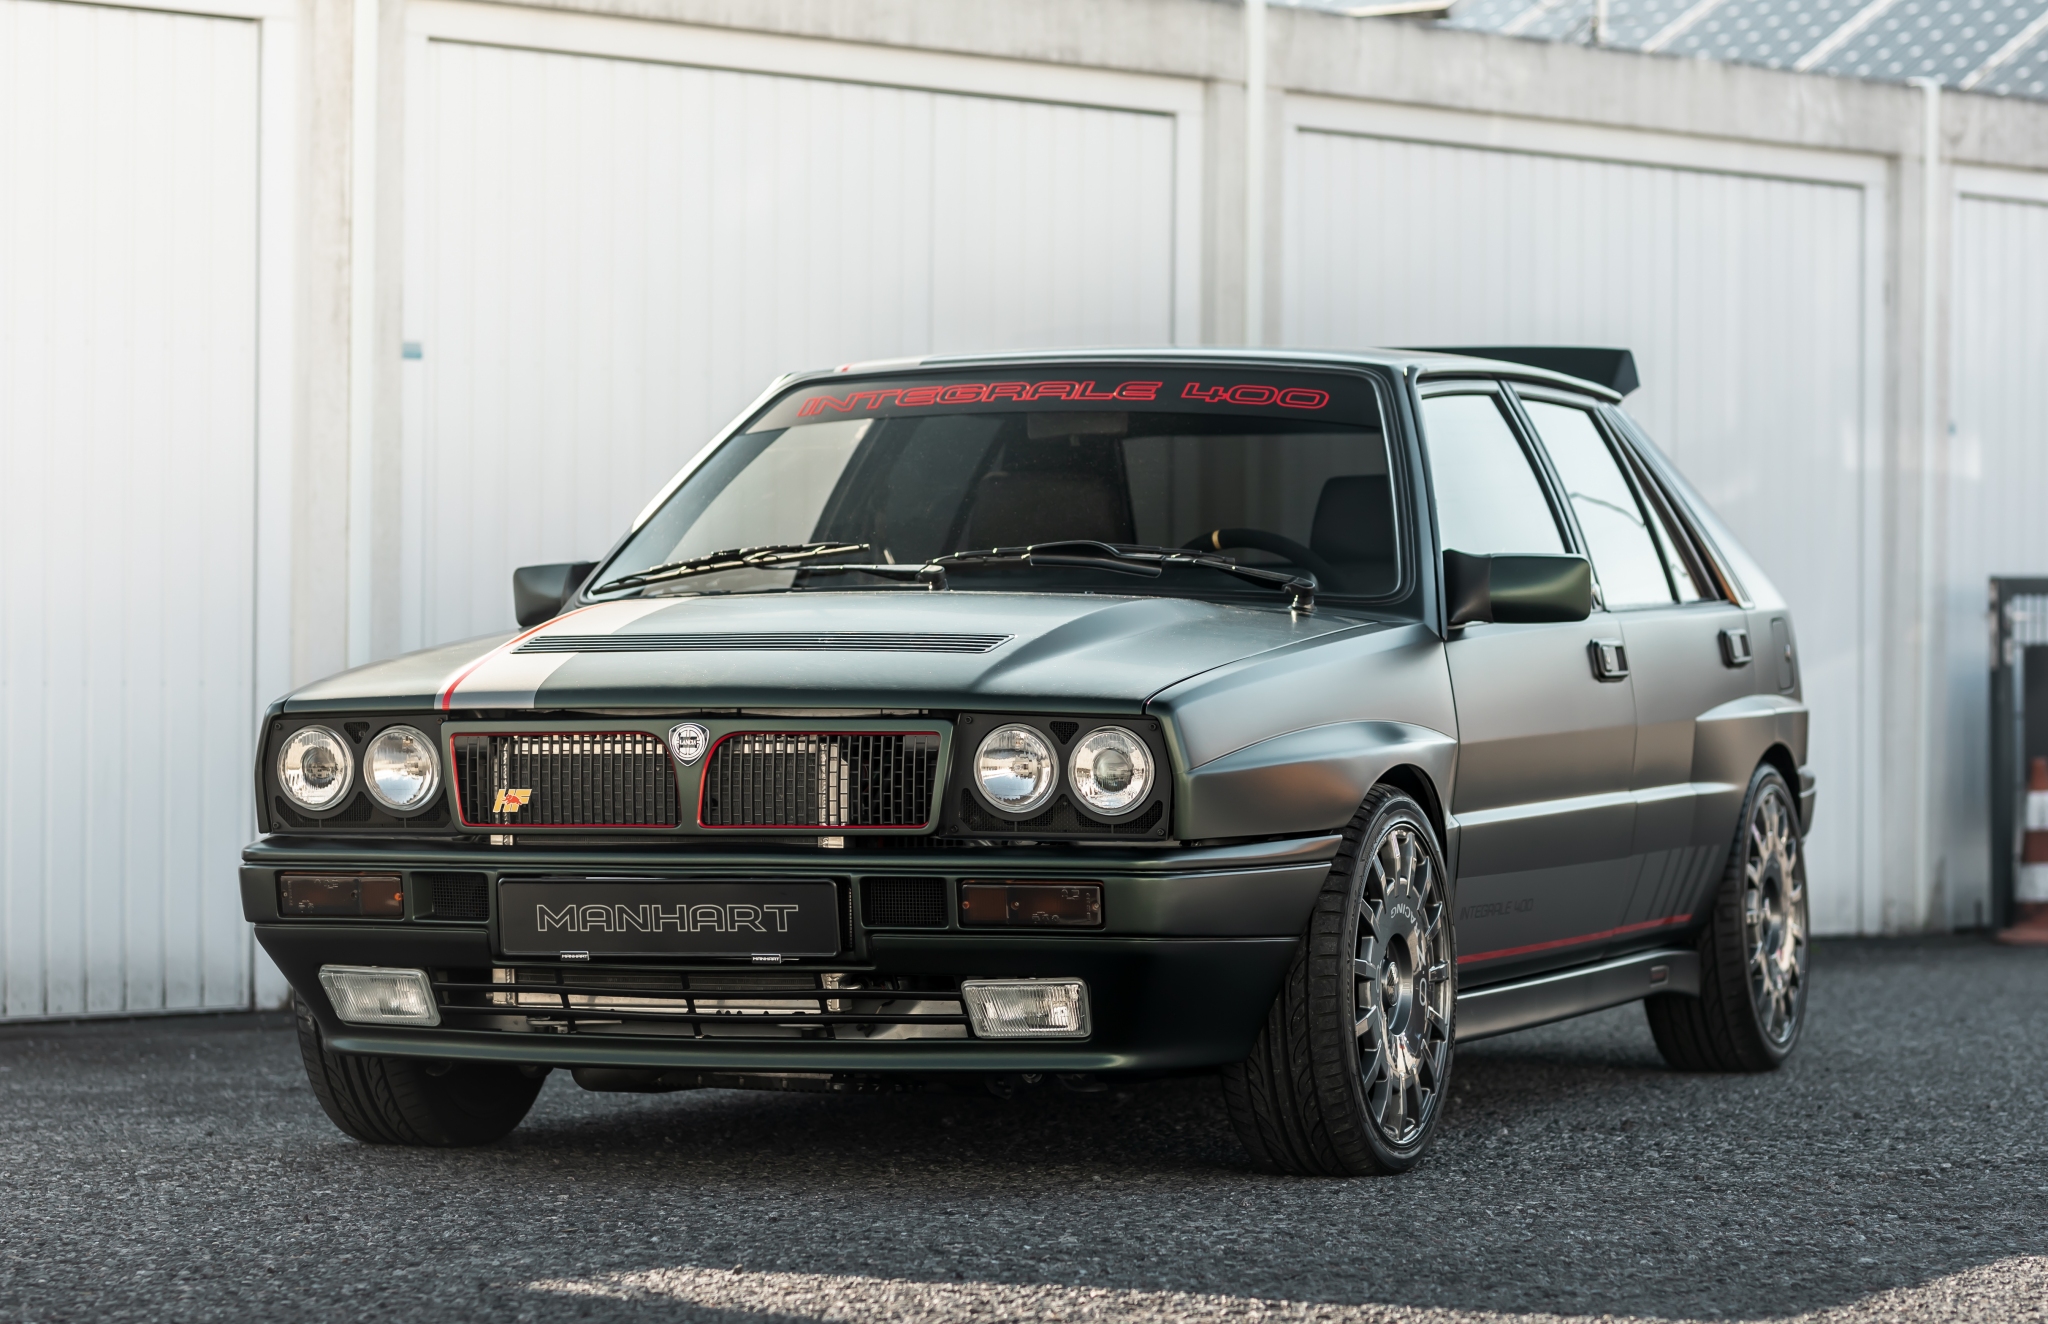 Lancia Integrale goes from rally rocket to restomod